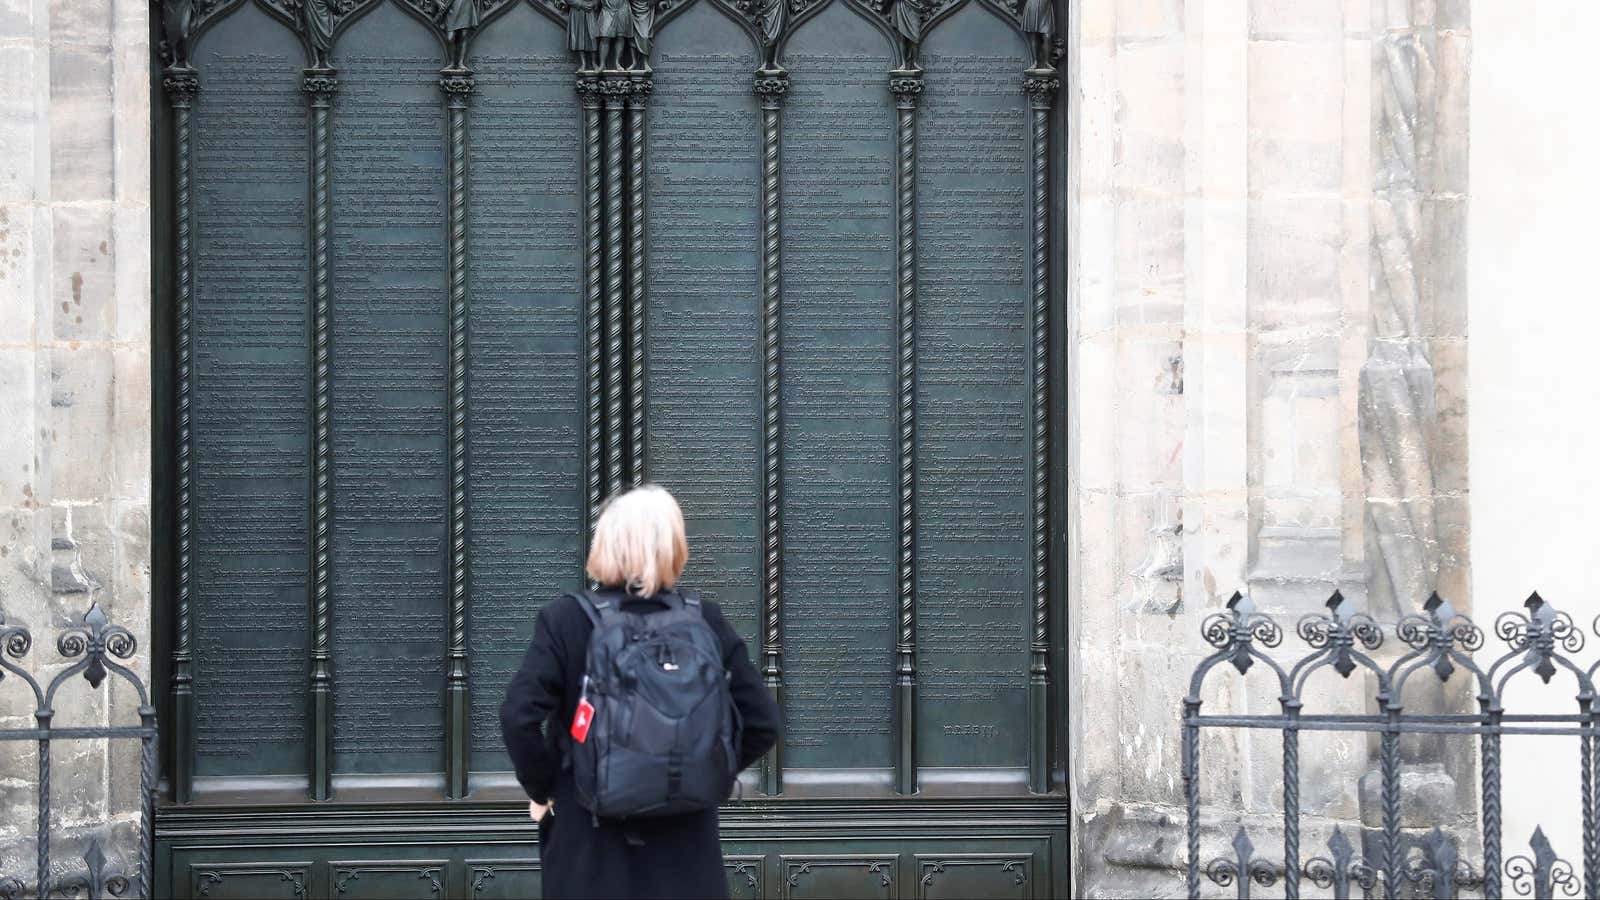 A woman looks at German theologian Martin Luther’s theses door during the 500th Anniversary of the Reformation.